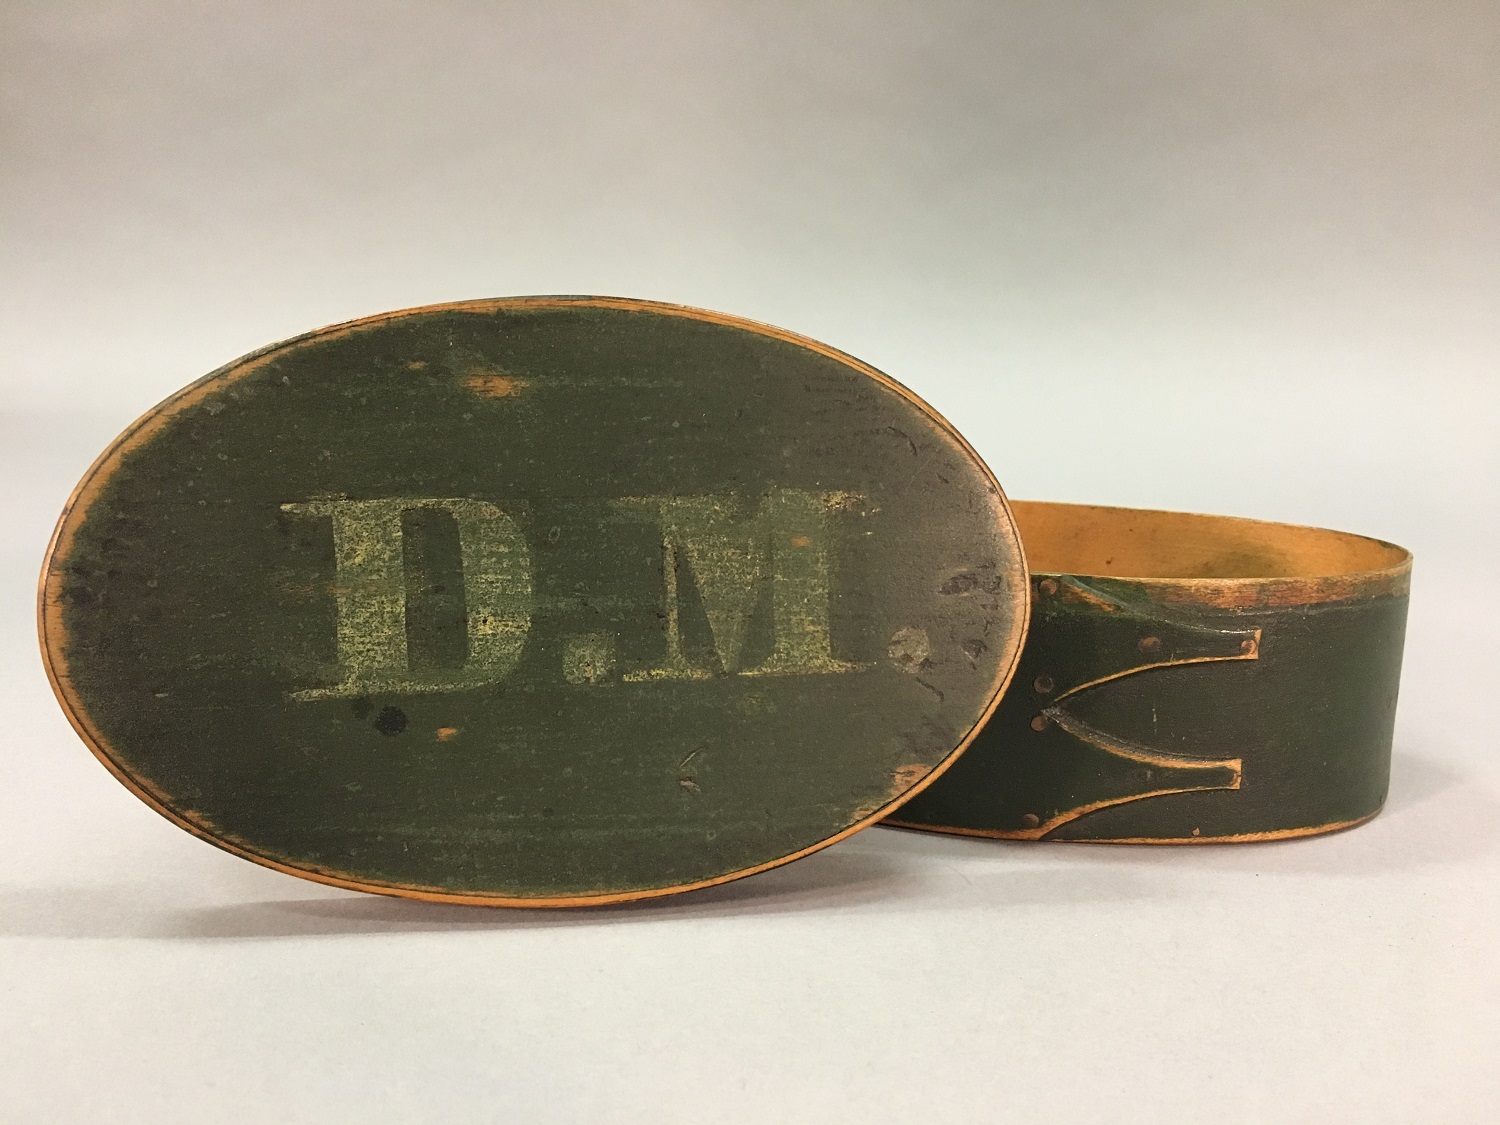 A green wooden box with the letter dm on it.